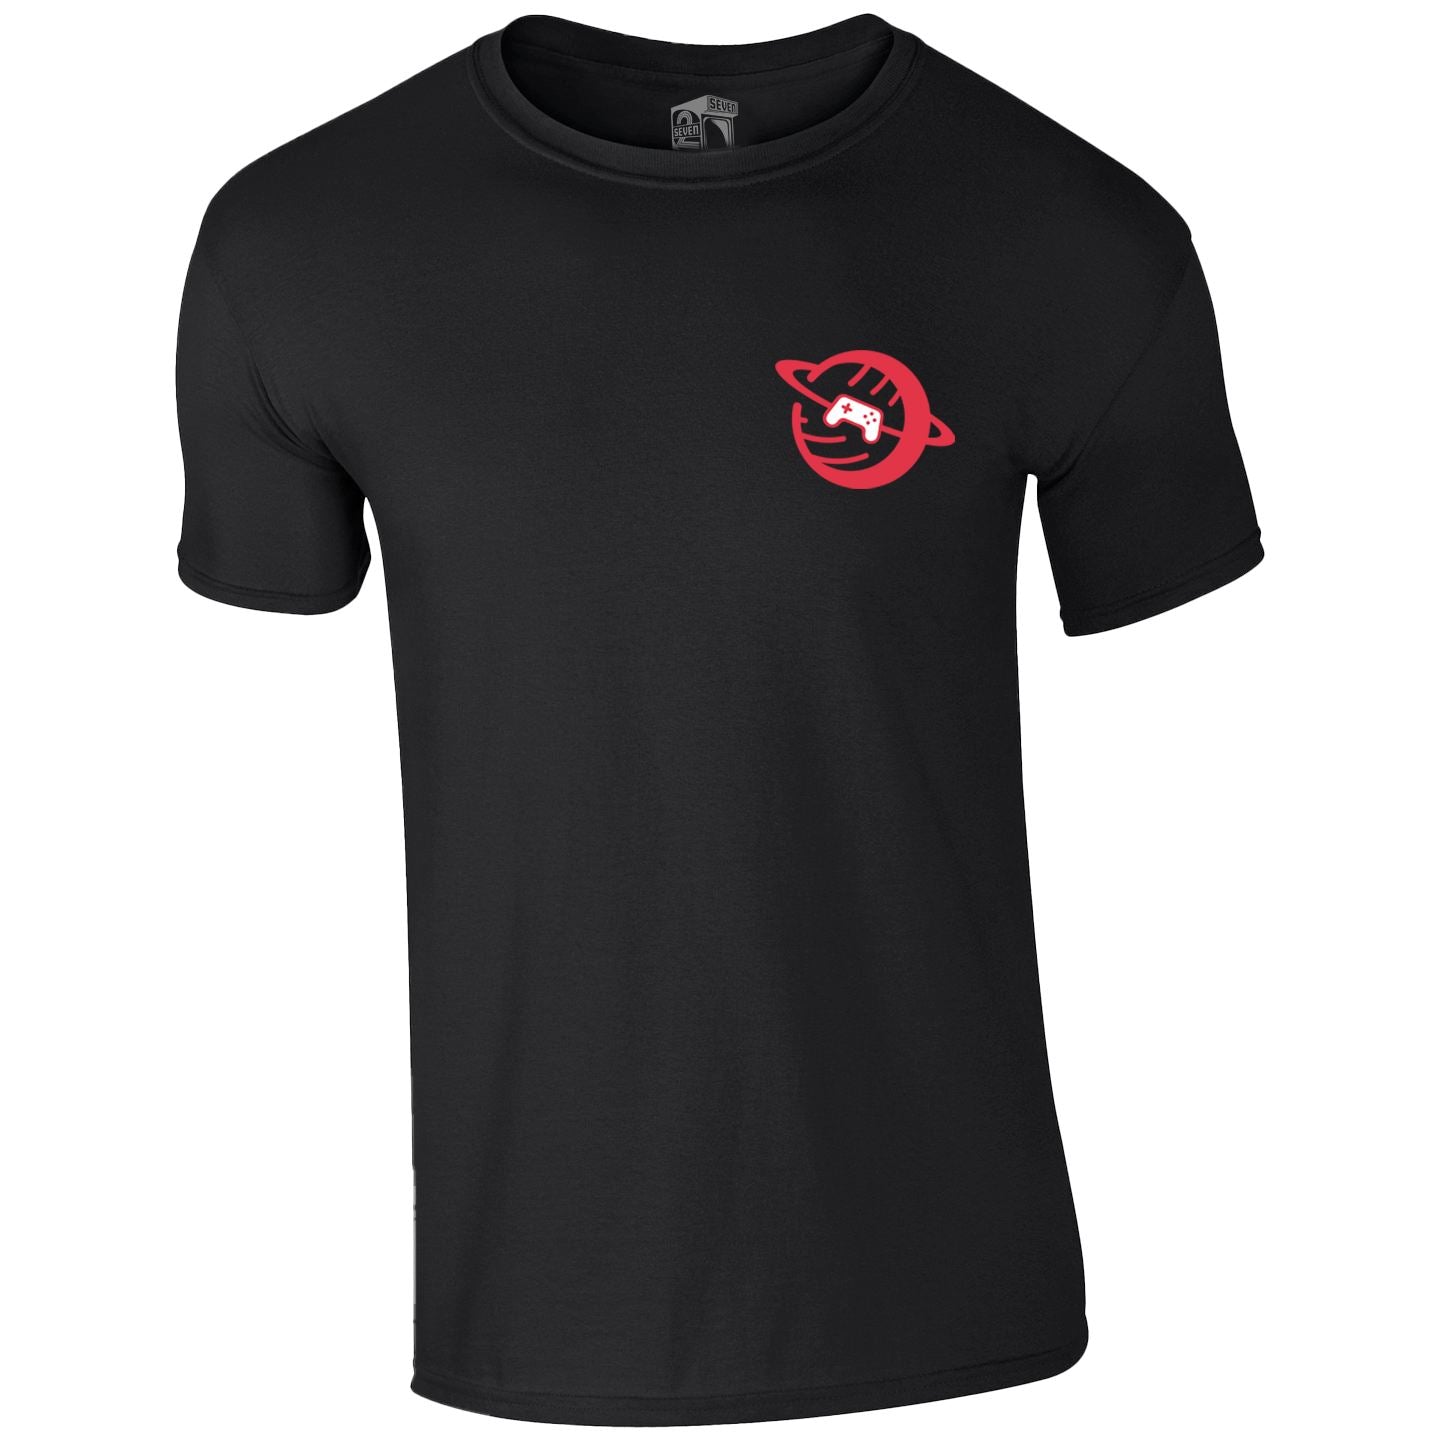 SIOW Official Charity T-Shirt BLACK/RED T-Shirt Seven Squared Small 34-36" Black/Red 